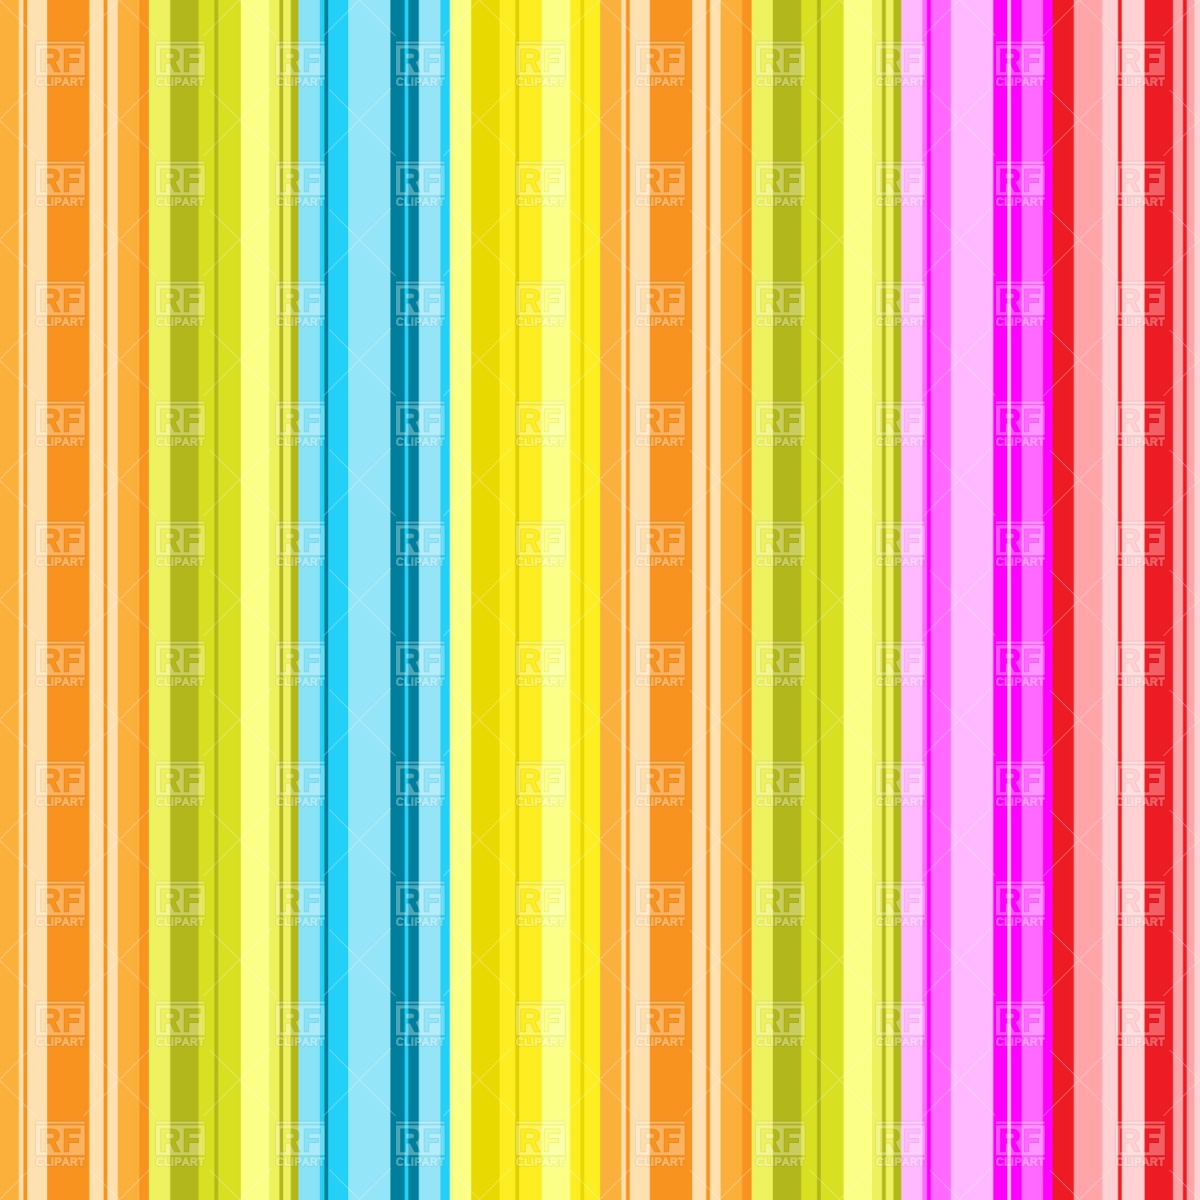 Rainbow Striped Background 837 Download Royalty Free Vector Clipart